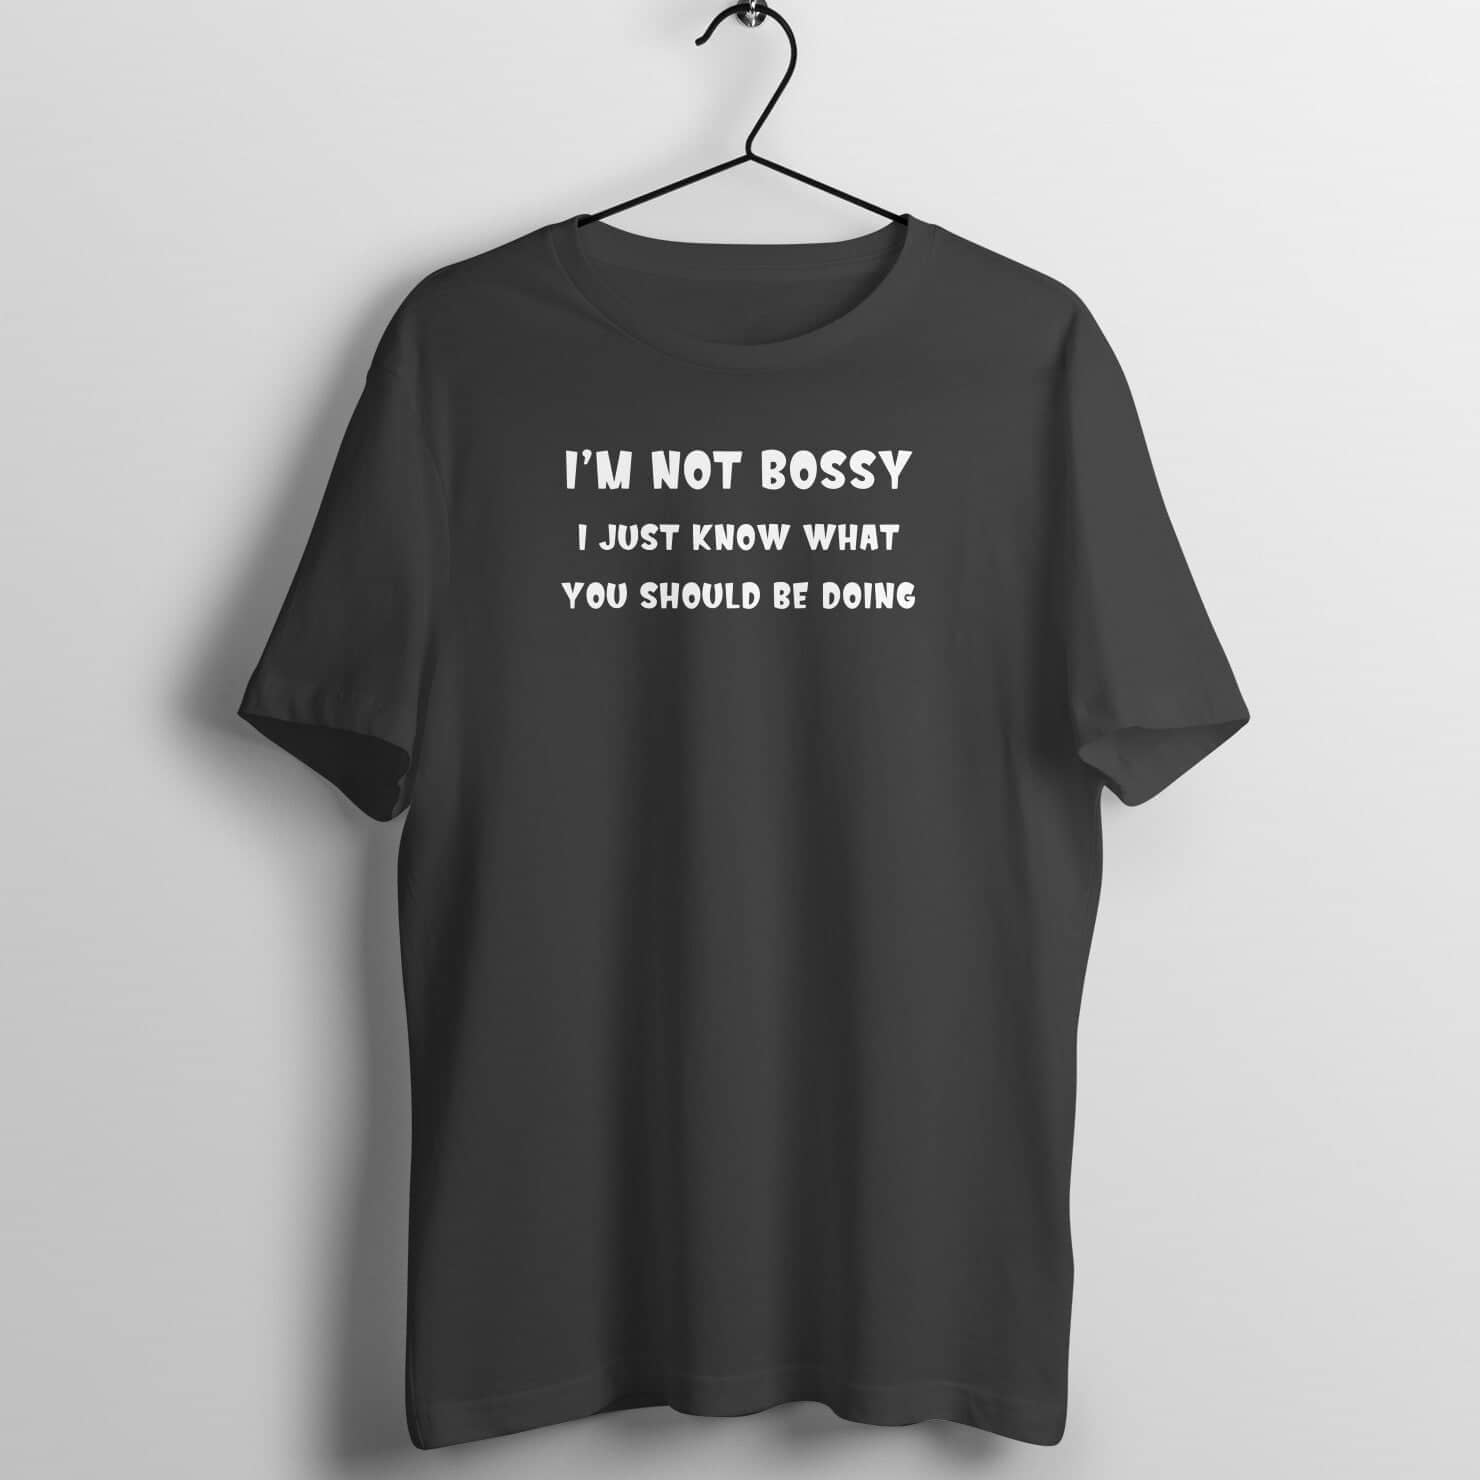 I'm Not Bossy I Just Know What You Should Be Doing Funny Black T Shirt for Men and Women freeshipping - Catch My Drift India